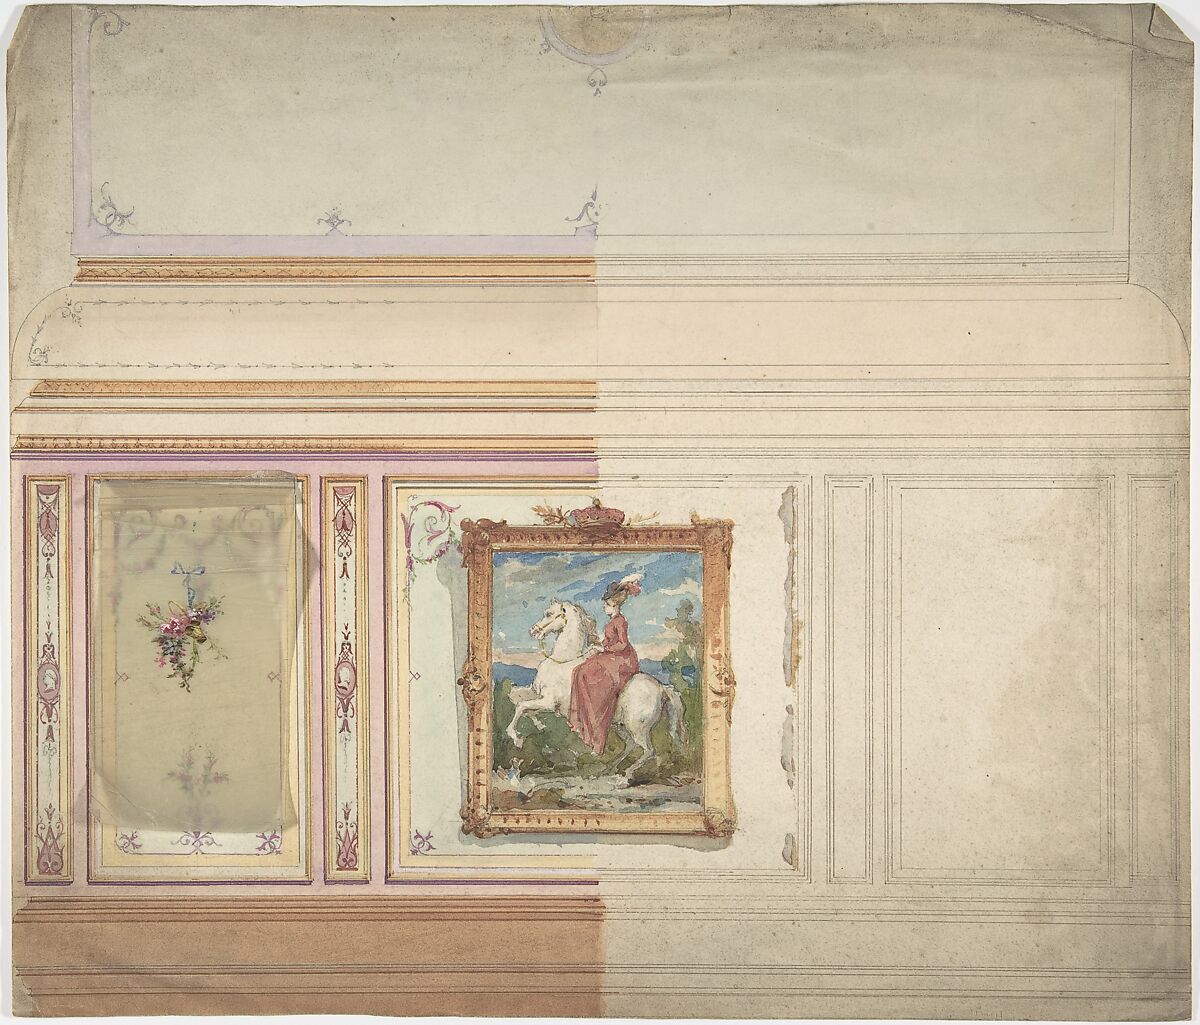 Wall Design including an Equestrienne Portrait, Anonymous, British, 19th century, Pen and ink and watercolor 